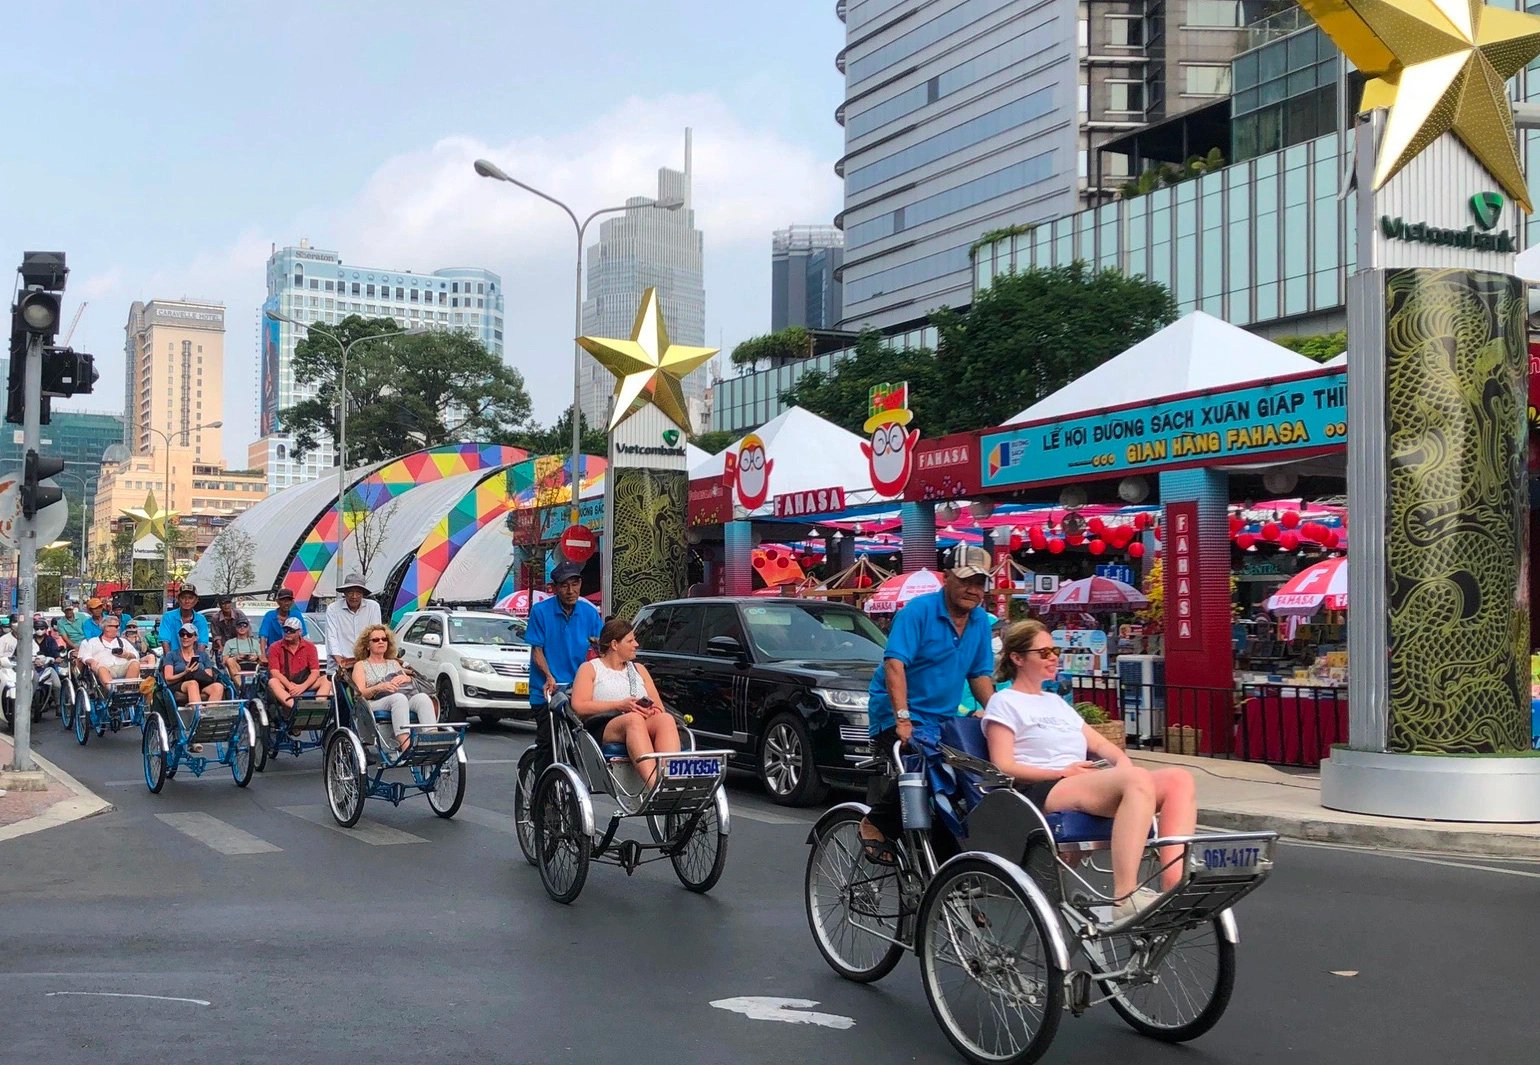 Foreign tourists enjoy pre-Tet atmosphere in Ho Chi Minh City